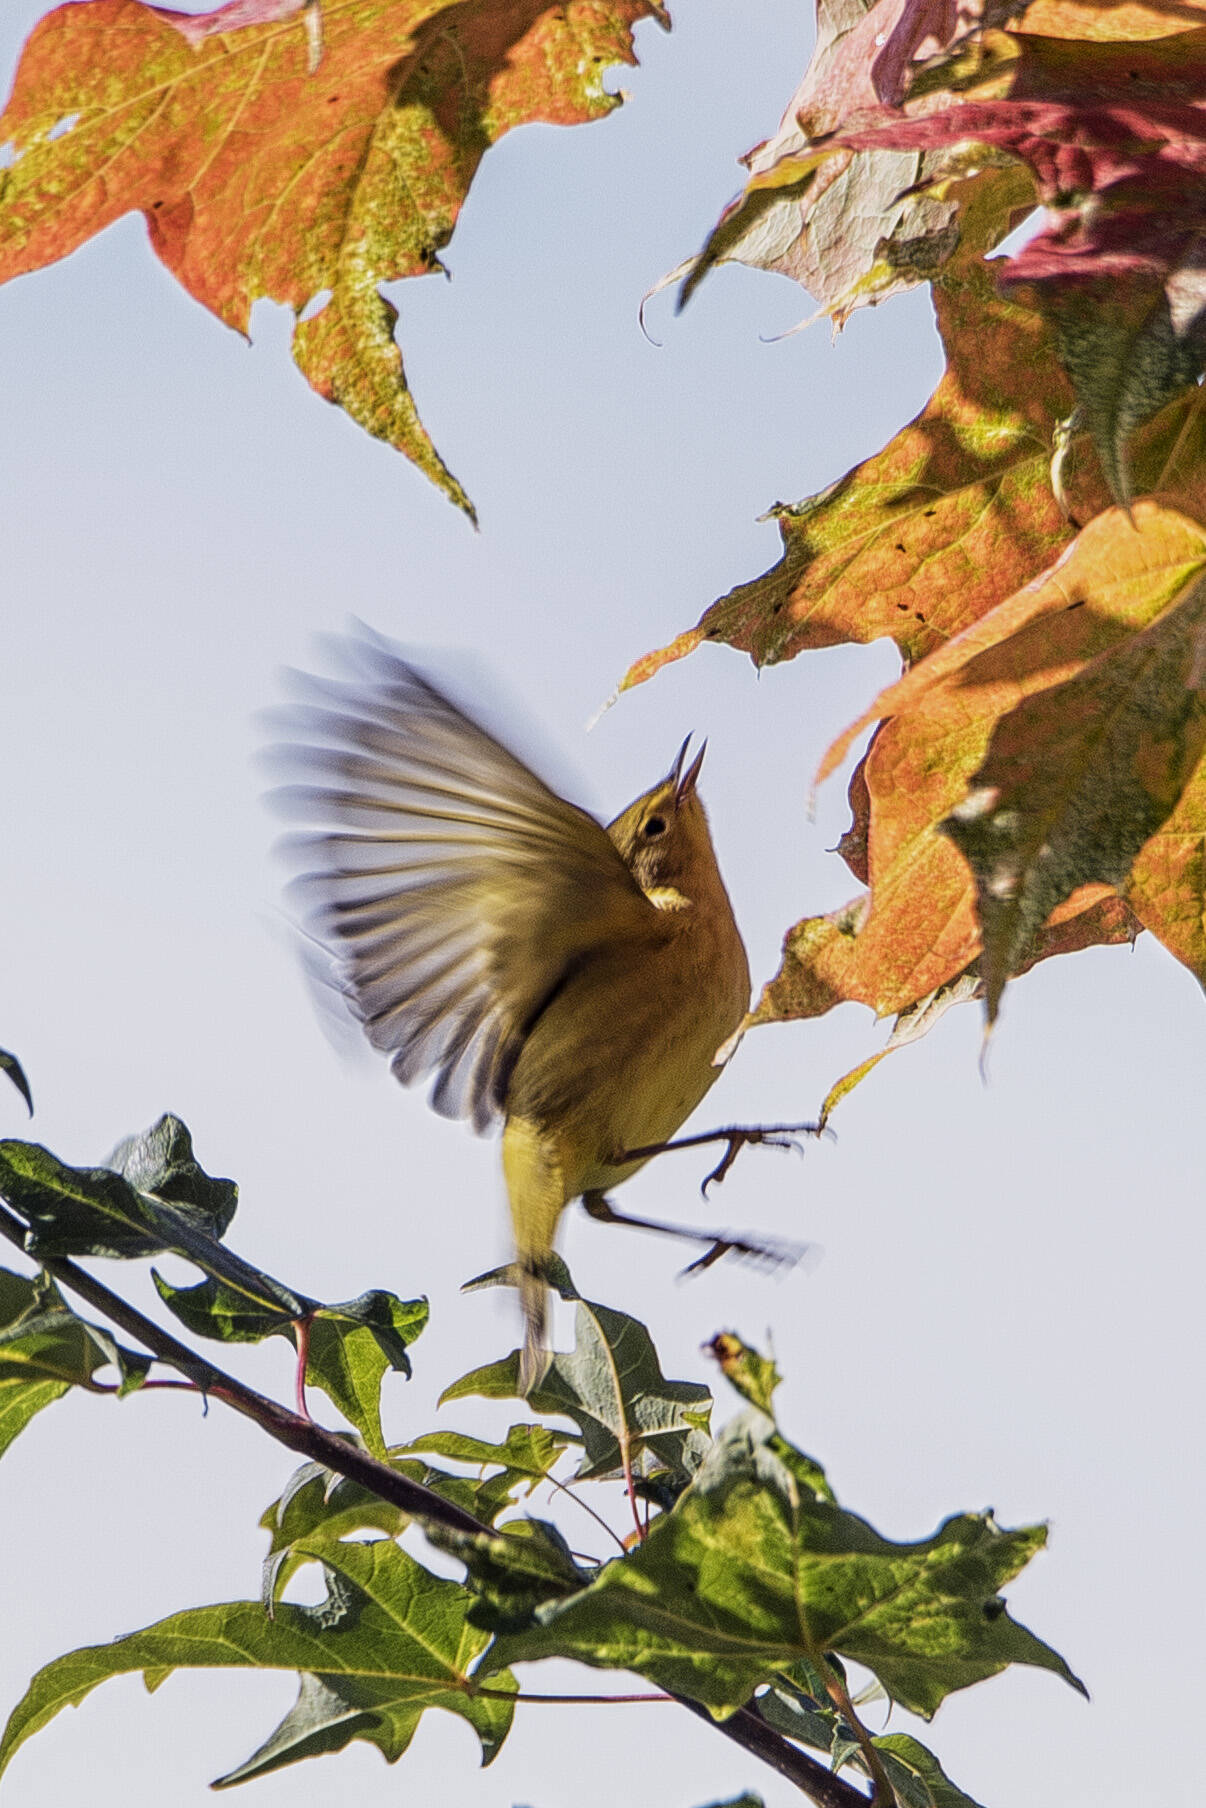 A yellow warbler feeding on insects amongst golden maple tree Out the Road. (Courtesy Photo / Kenneth Gill, gillfoto)